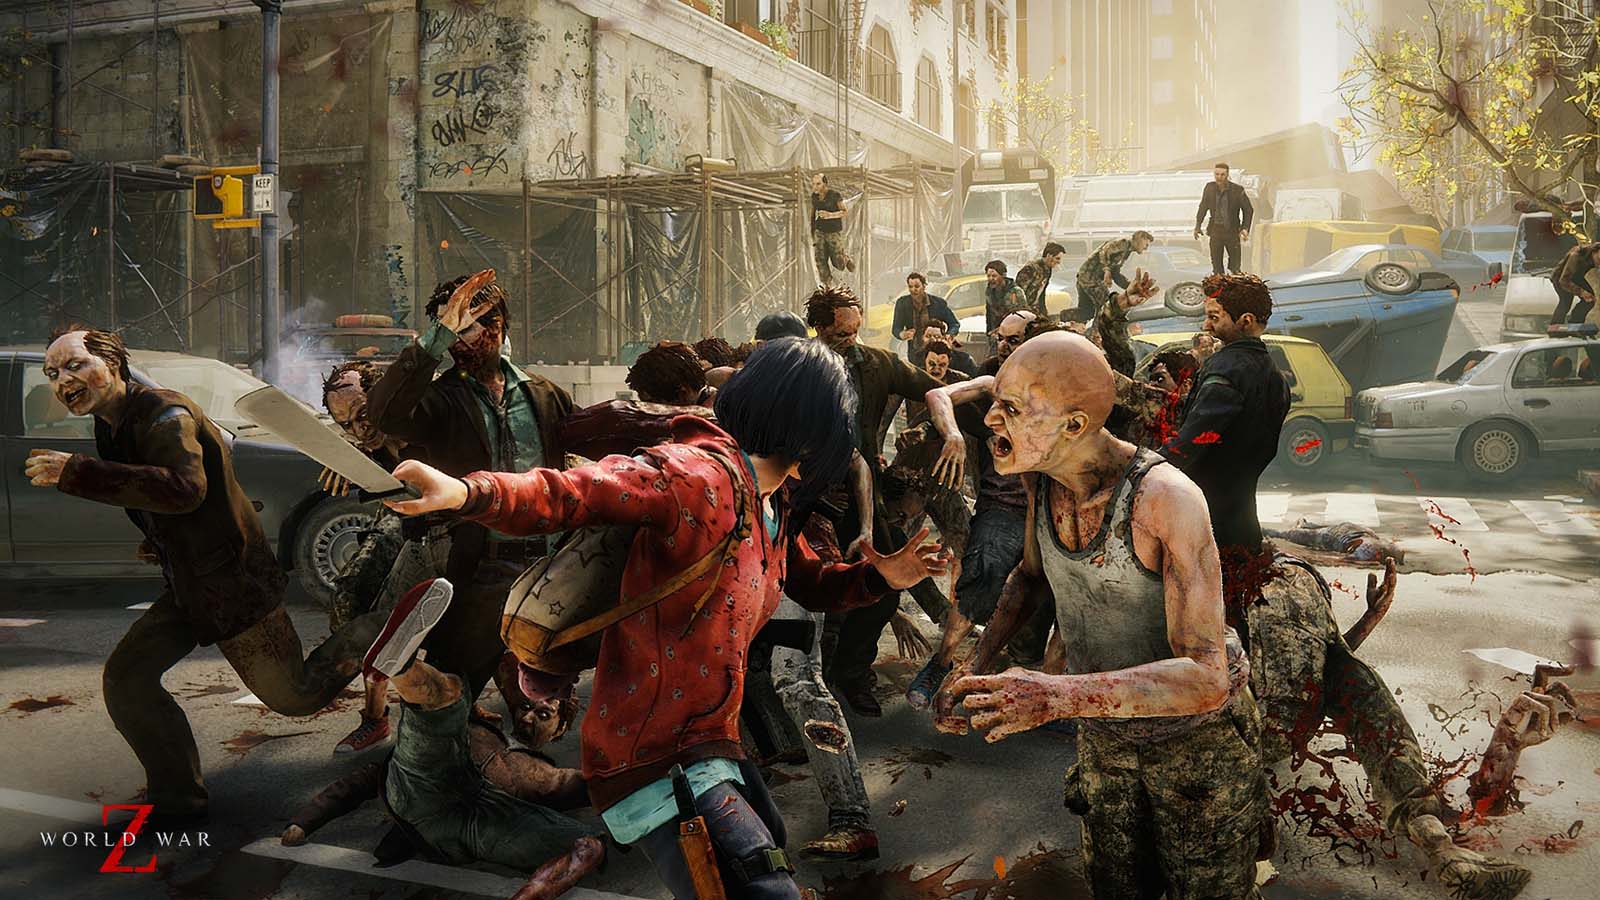 World War Z unleashes new key art and a horde of zombie